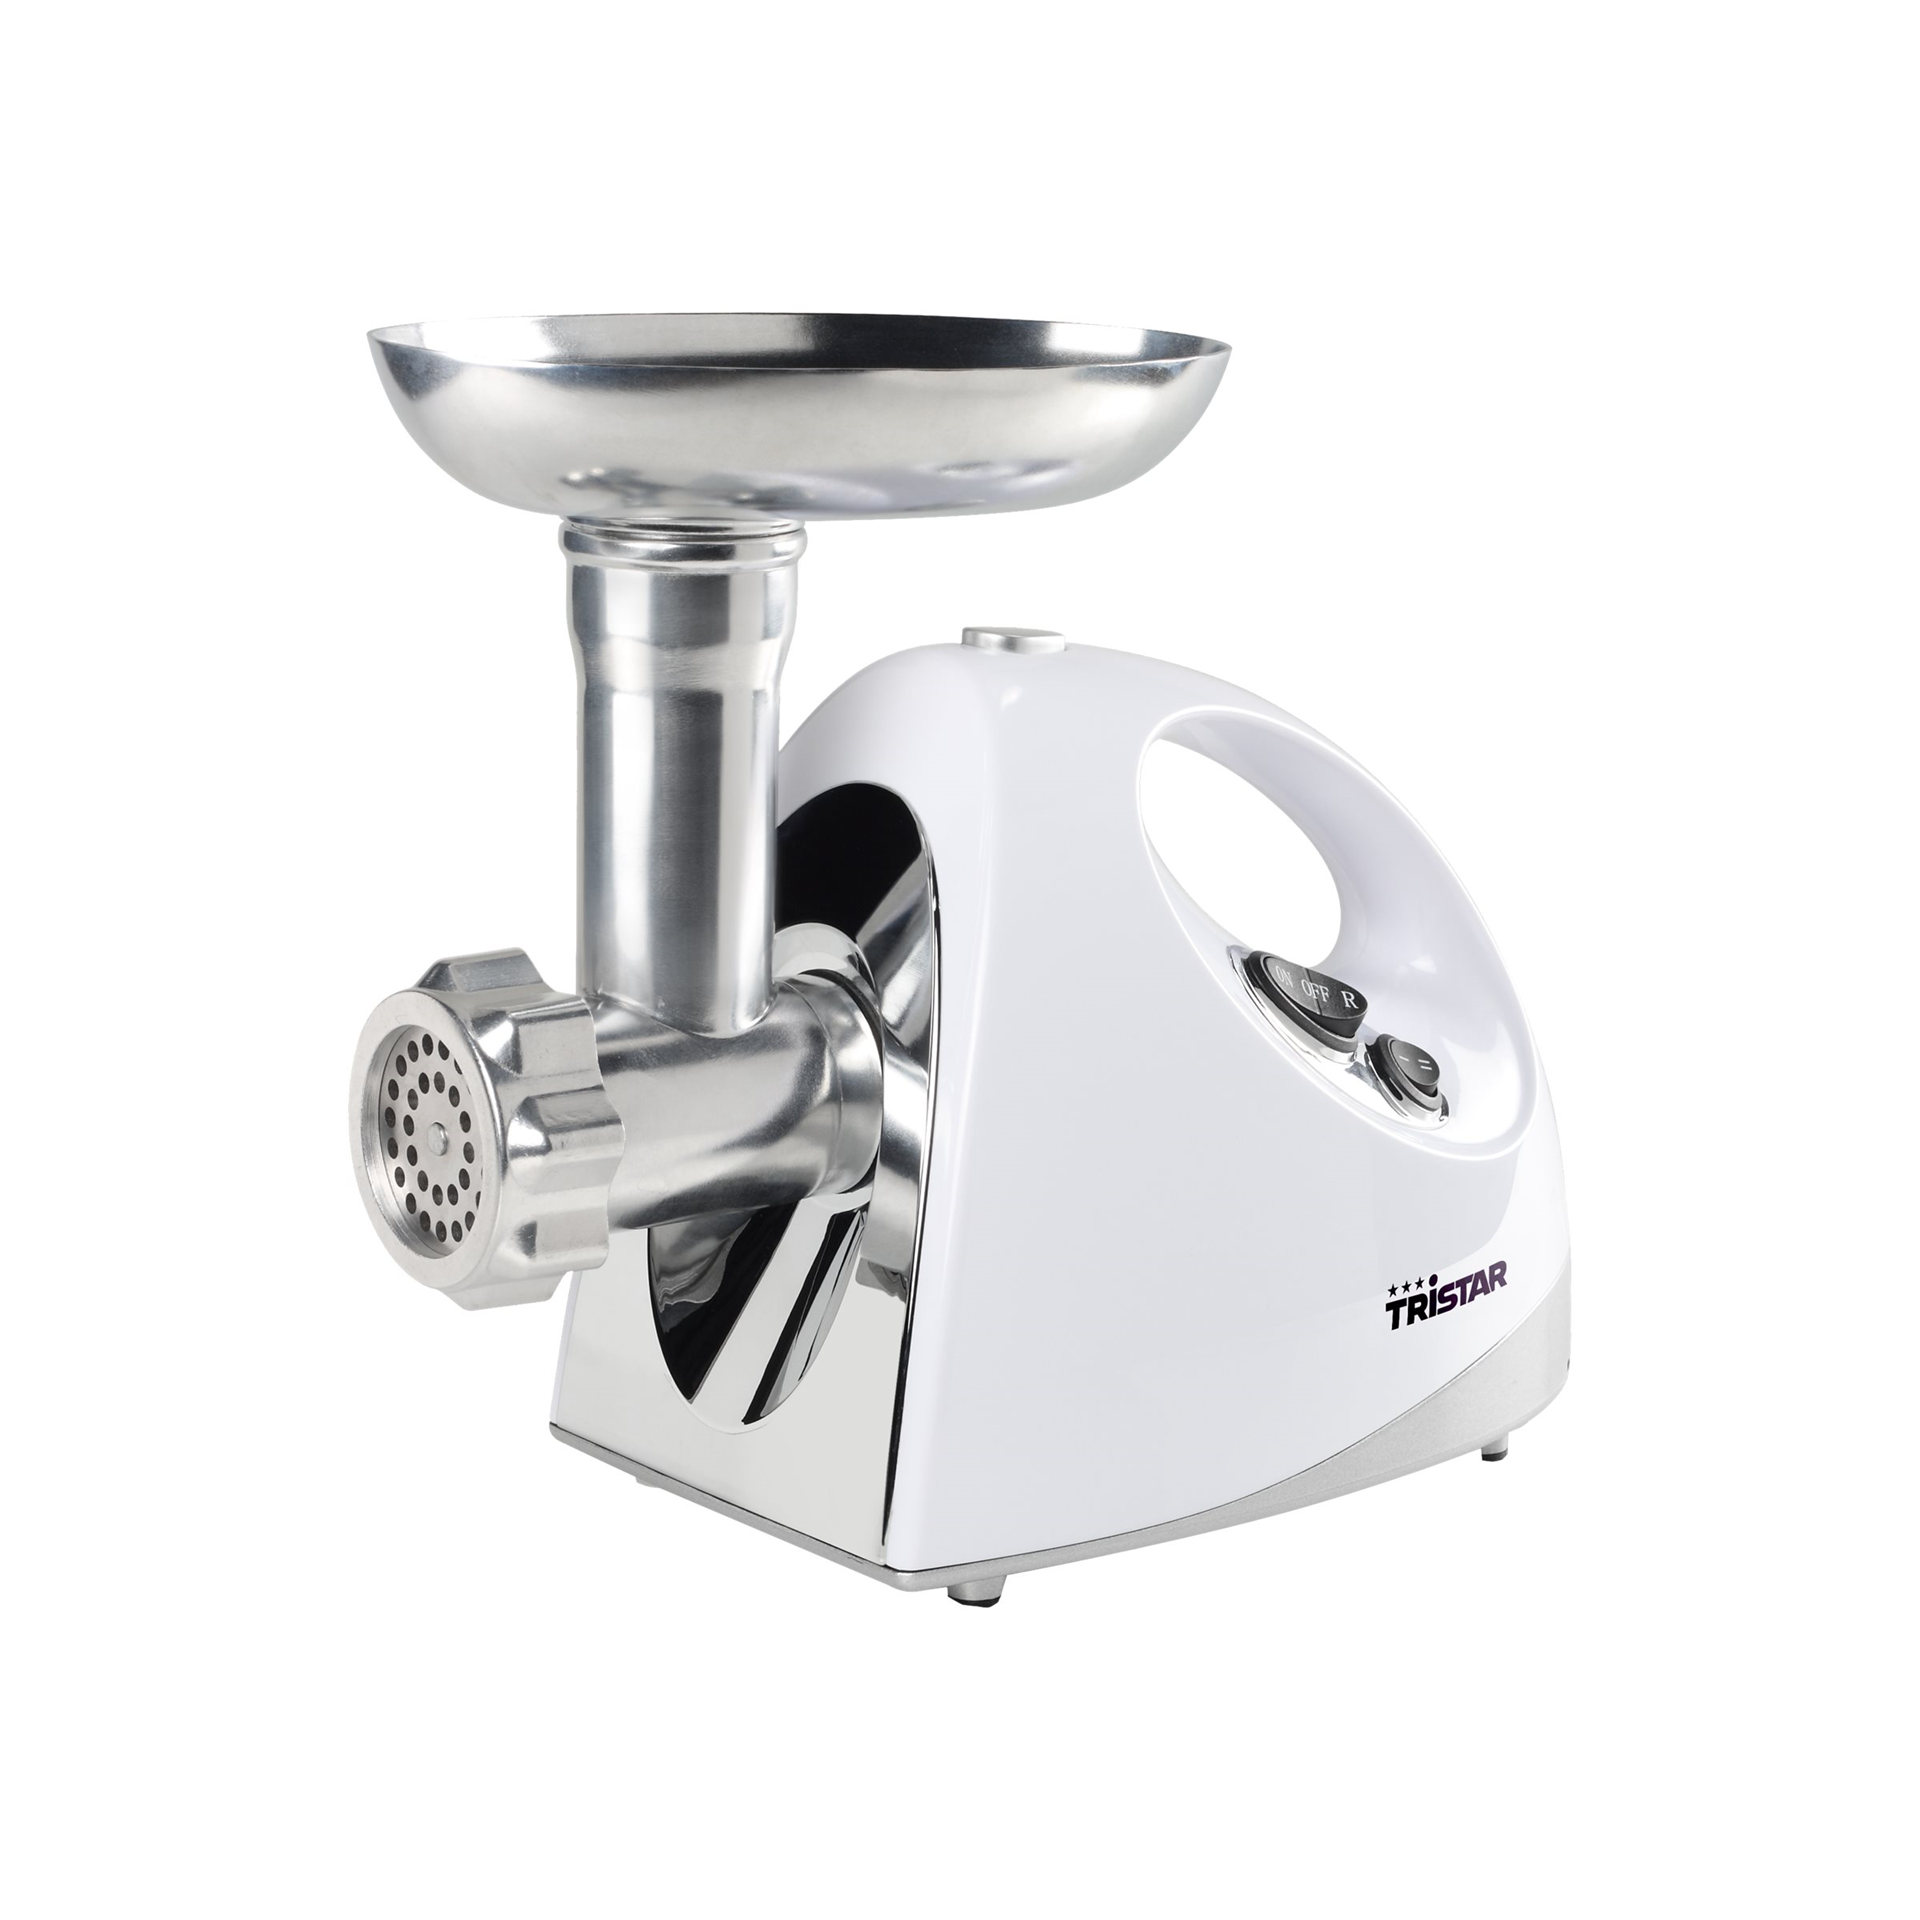 Tristar | VM-4210 Meat Grinder | White | 3 Stainless steel grinding plates, Aluminum grinder head, Aluminum hopper tray, Sausage stuffer, Kubbe attachment, Sausage accessory, Stainless steel blade